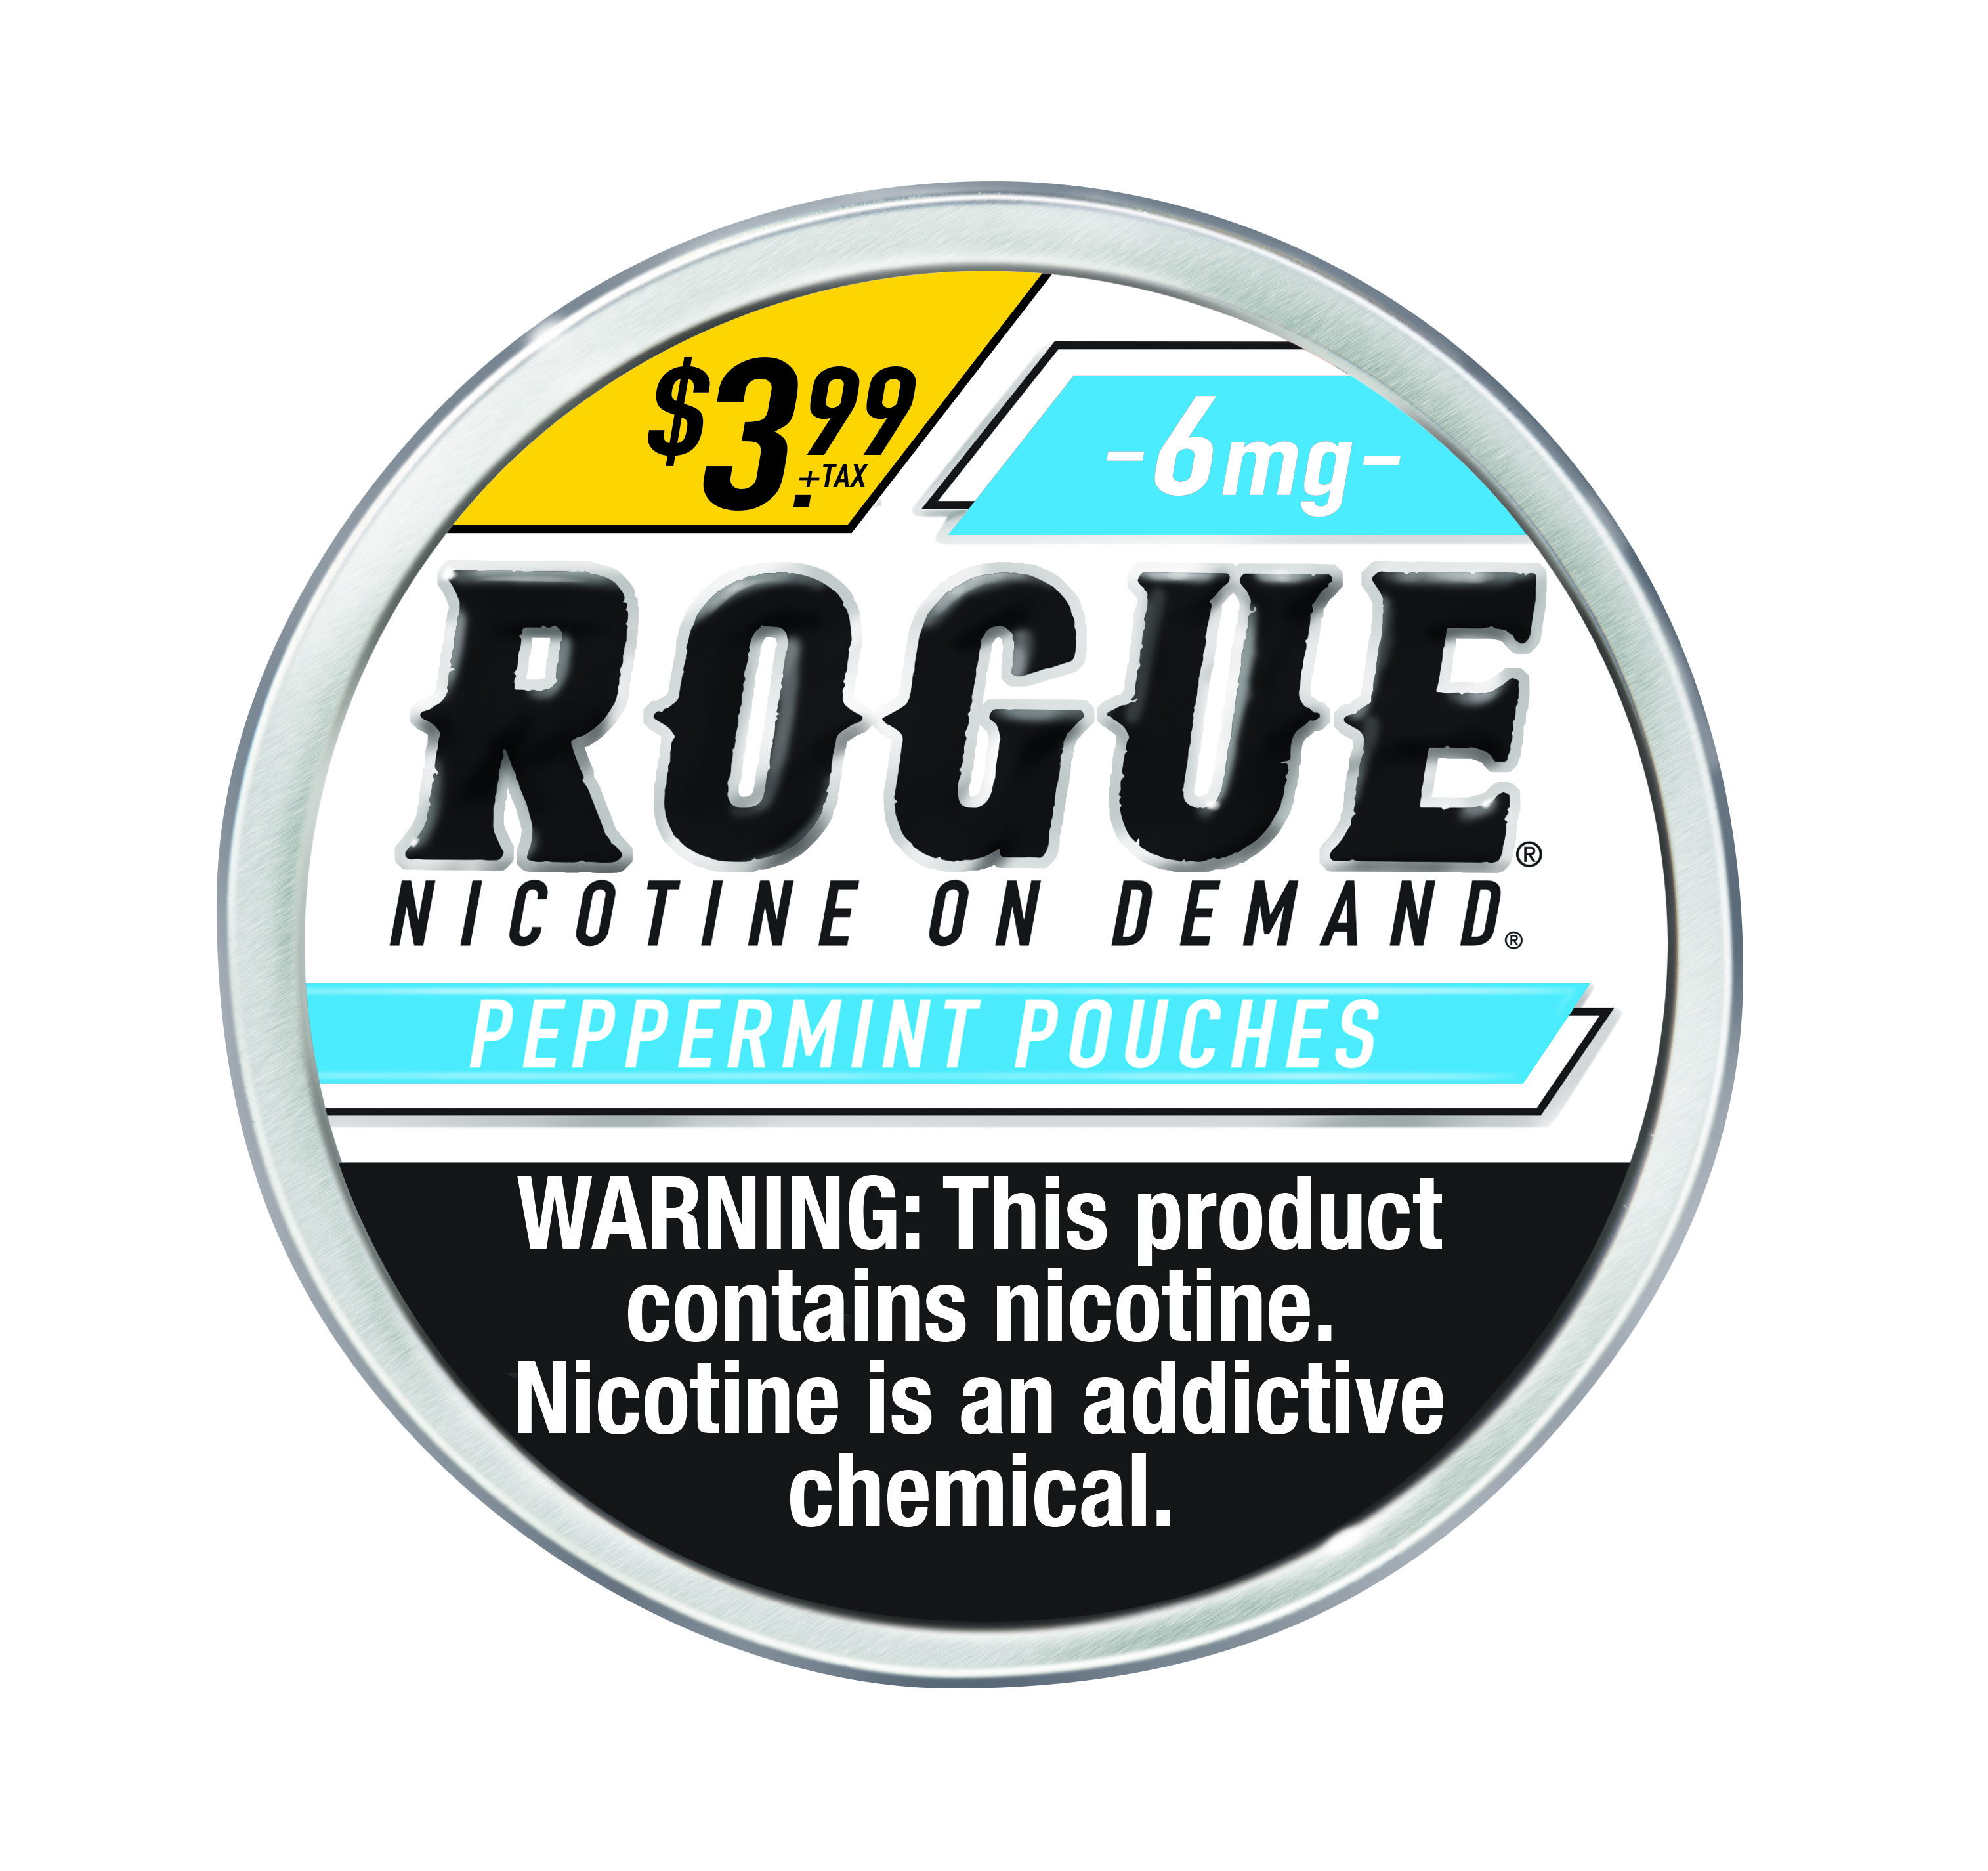 Rogue peppermint nicotine pouch $3.99 6mg 5ct